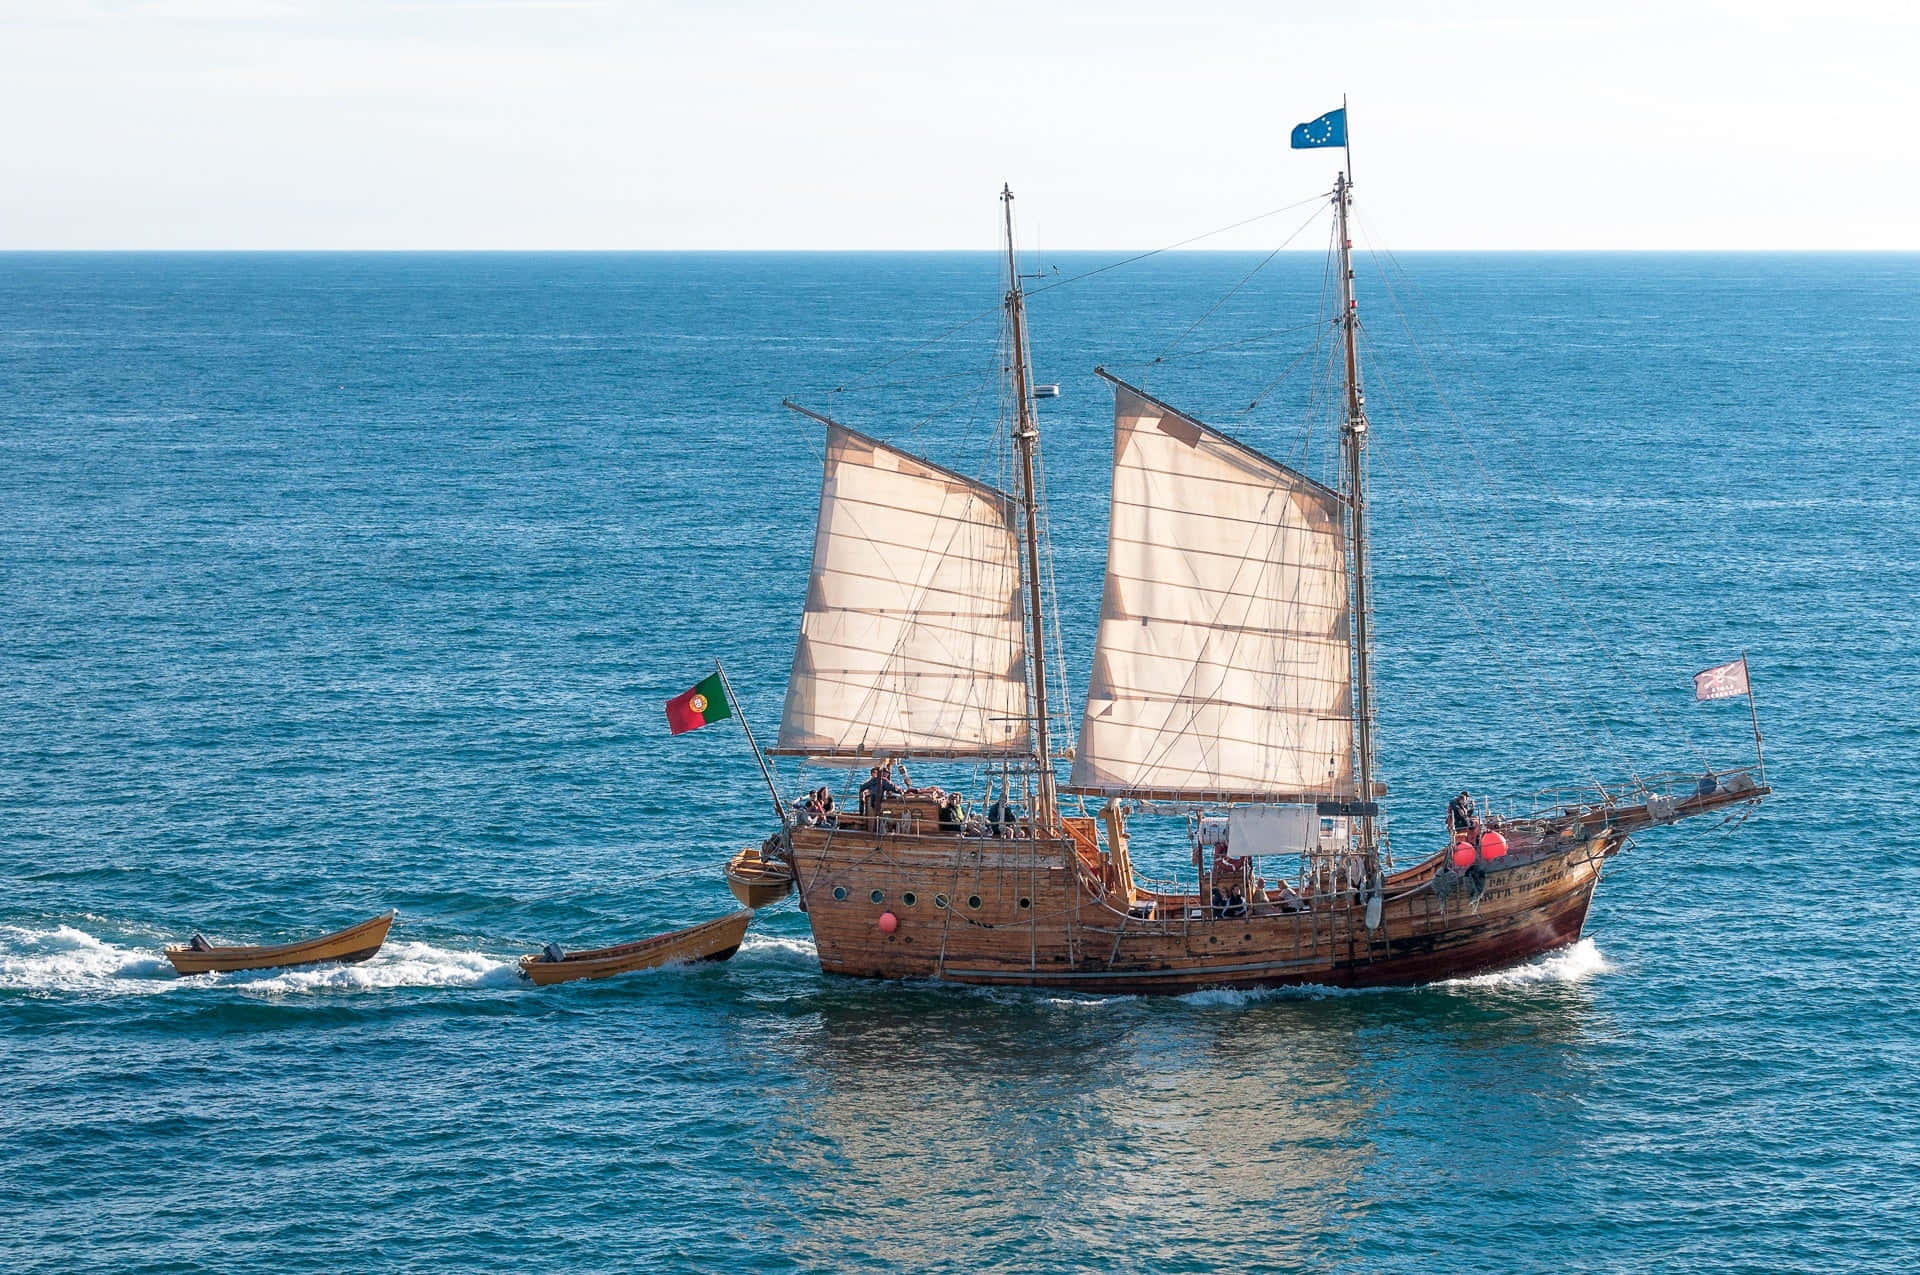 Download Real Pirate Ship In Ocean Picture | Wallpapers.com